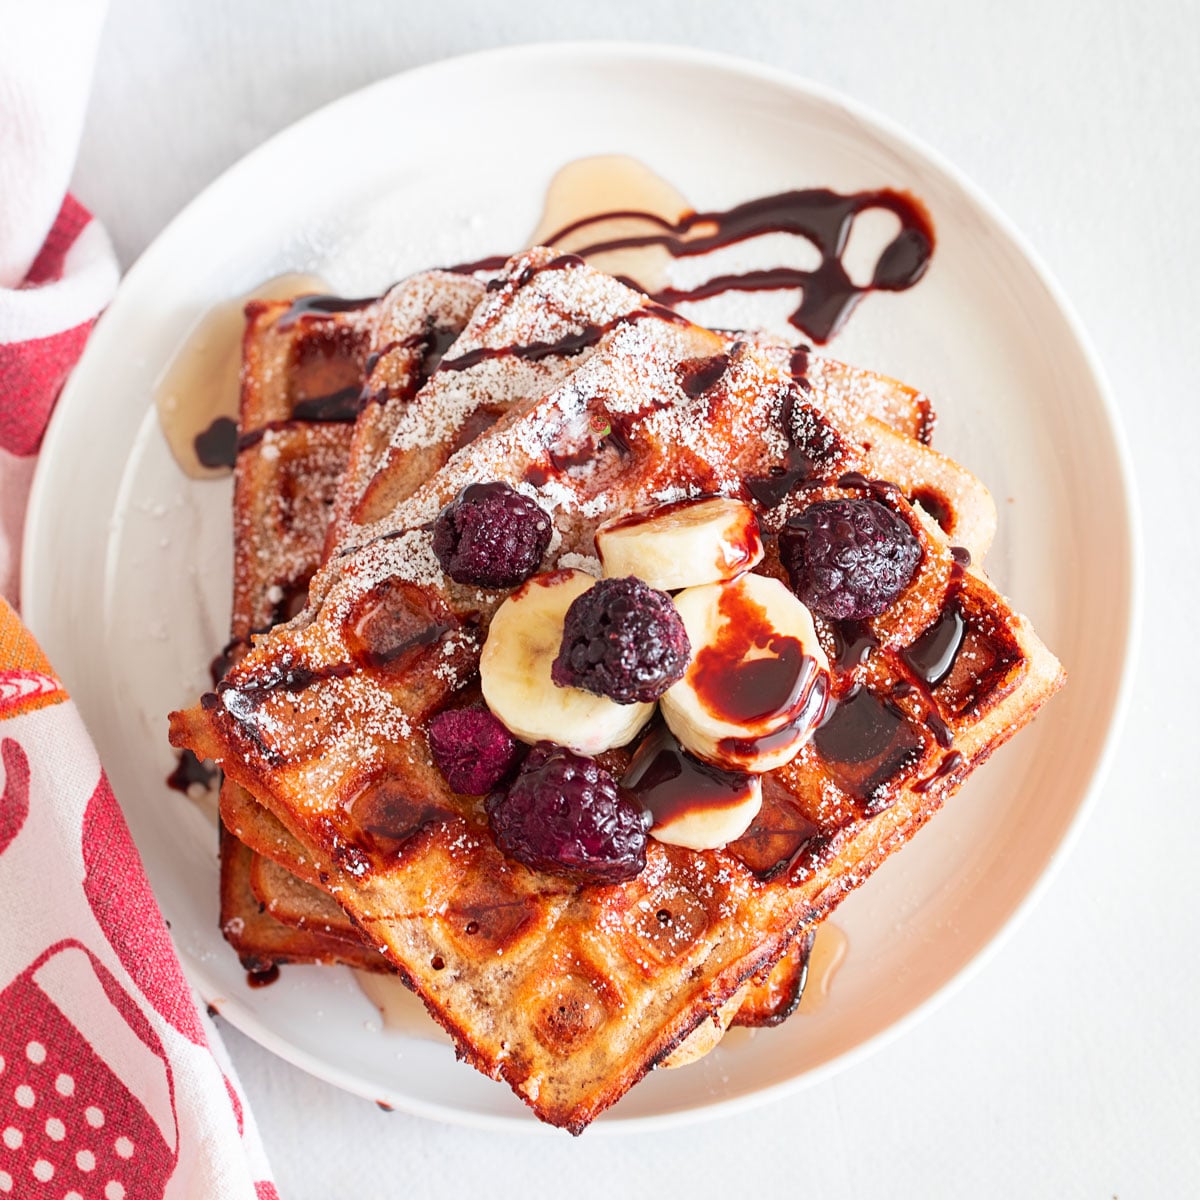 Top view of a stack of waffles topped with chocolate sauce, maple syrup, bananas and berries